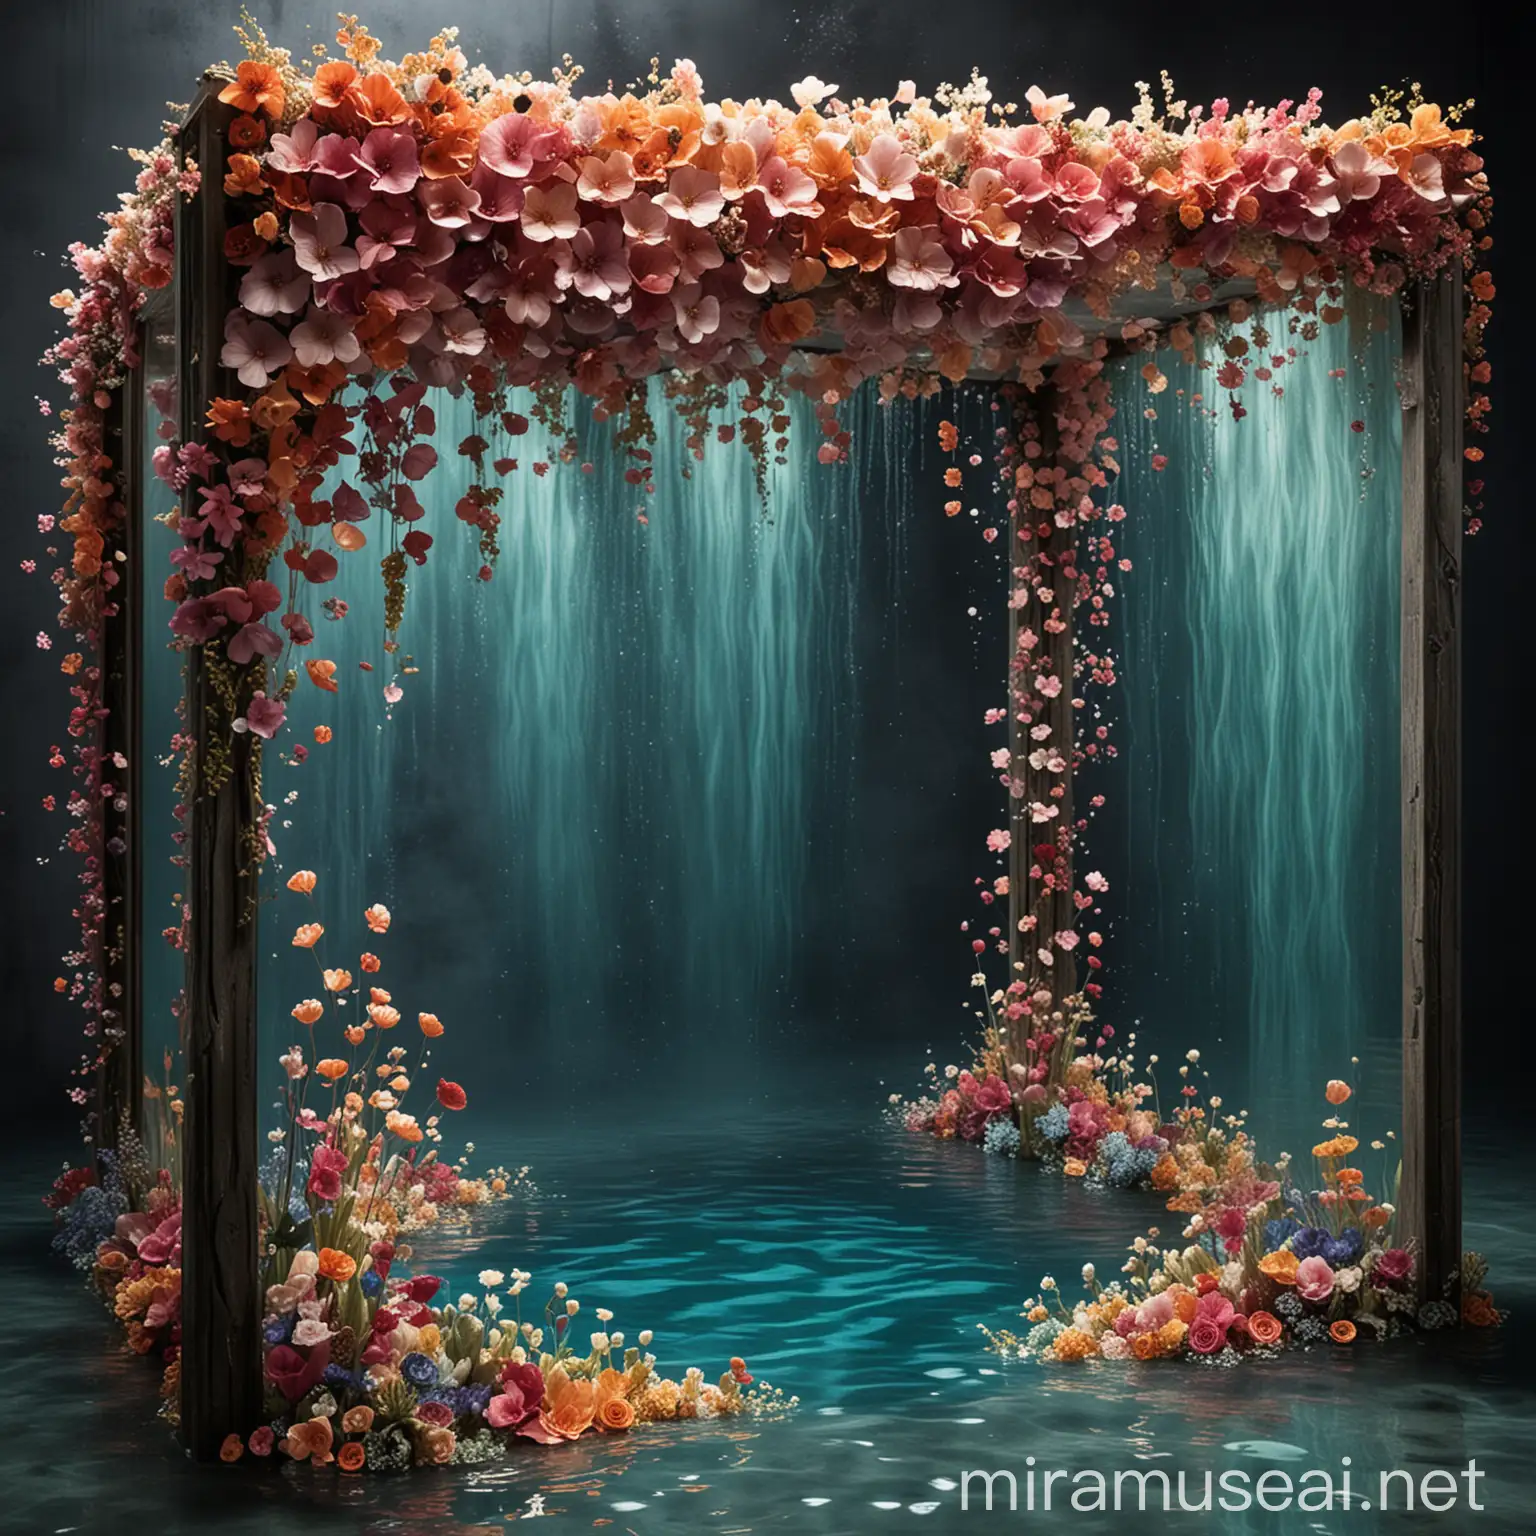 Underwater Booth with Blooming 3D Flowers